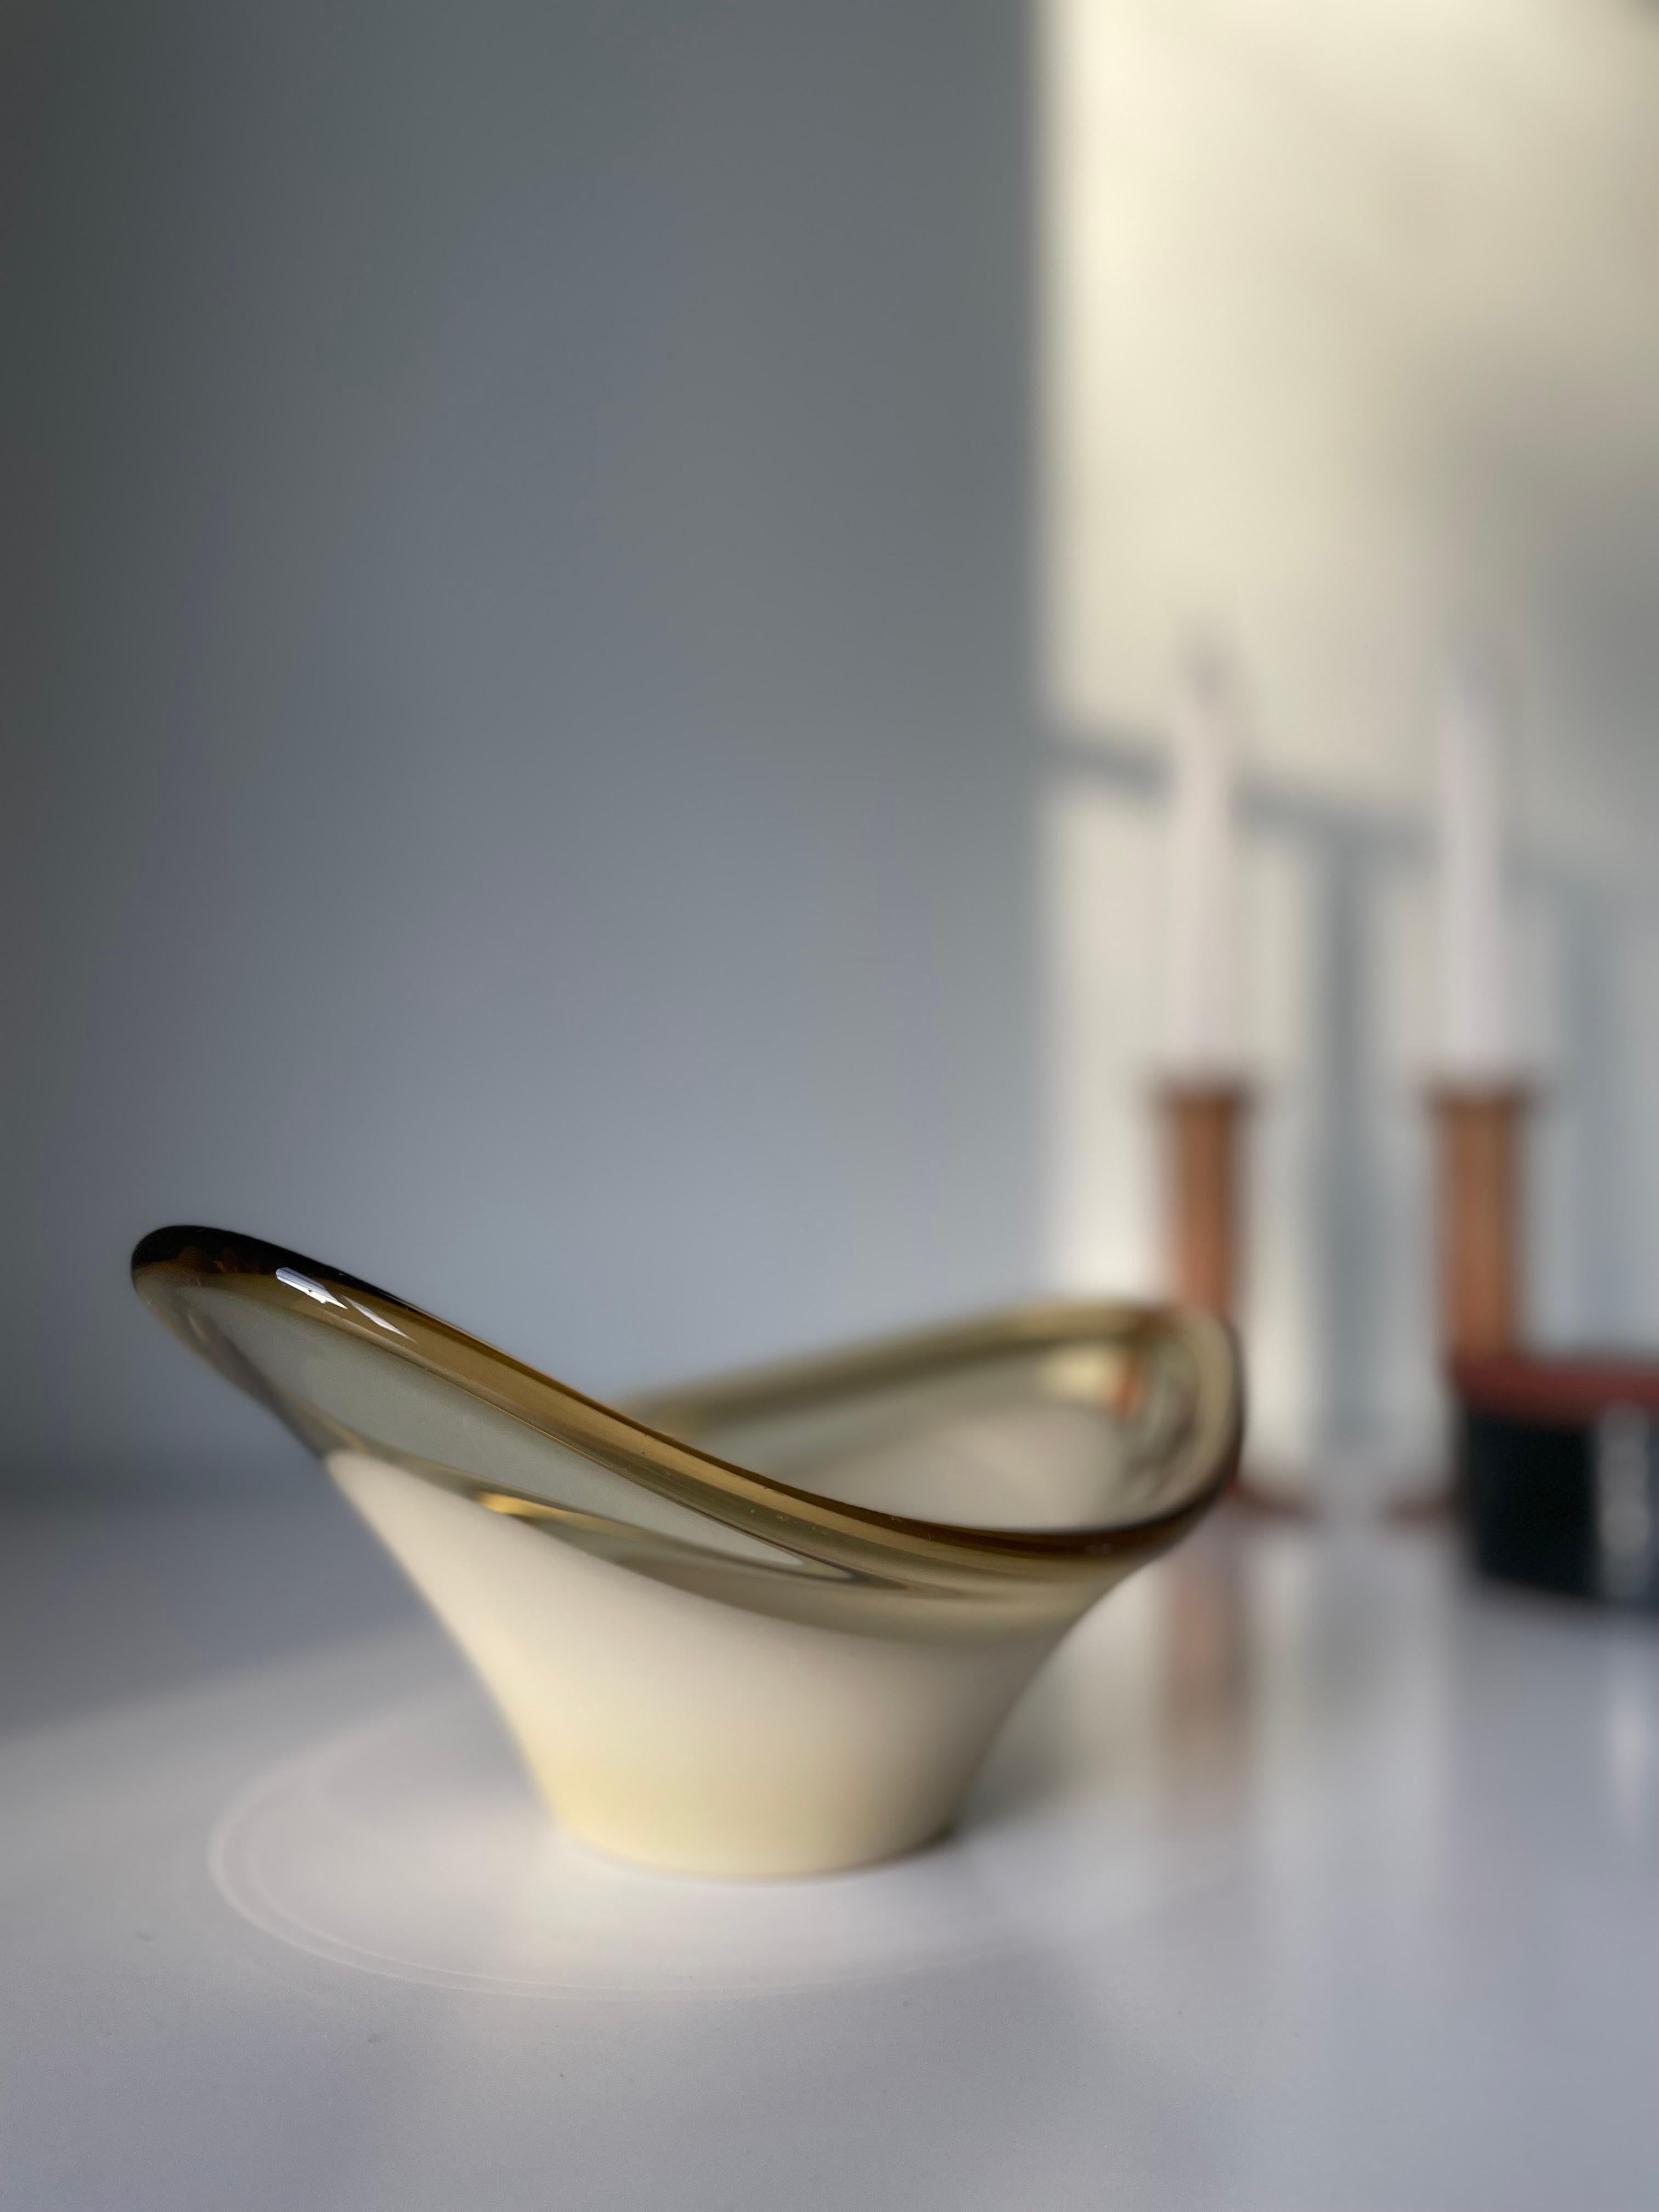 Mouth-blown modernist art glass piece from the 1960s. Smooth asymmetrical decorative vide poche bowl attributed to Danish Holmegaard. Latte color encased in clear glass with a slight smoky golden tint. Round base with a wing on each side of the